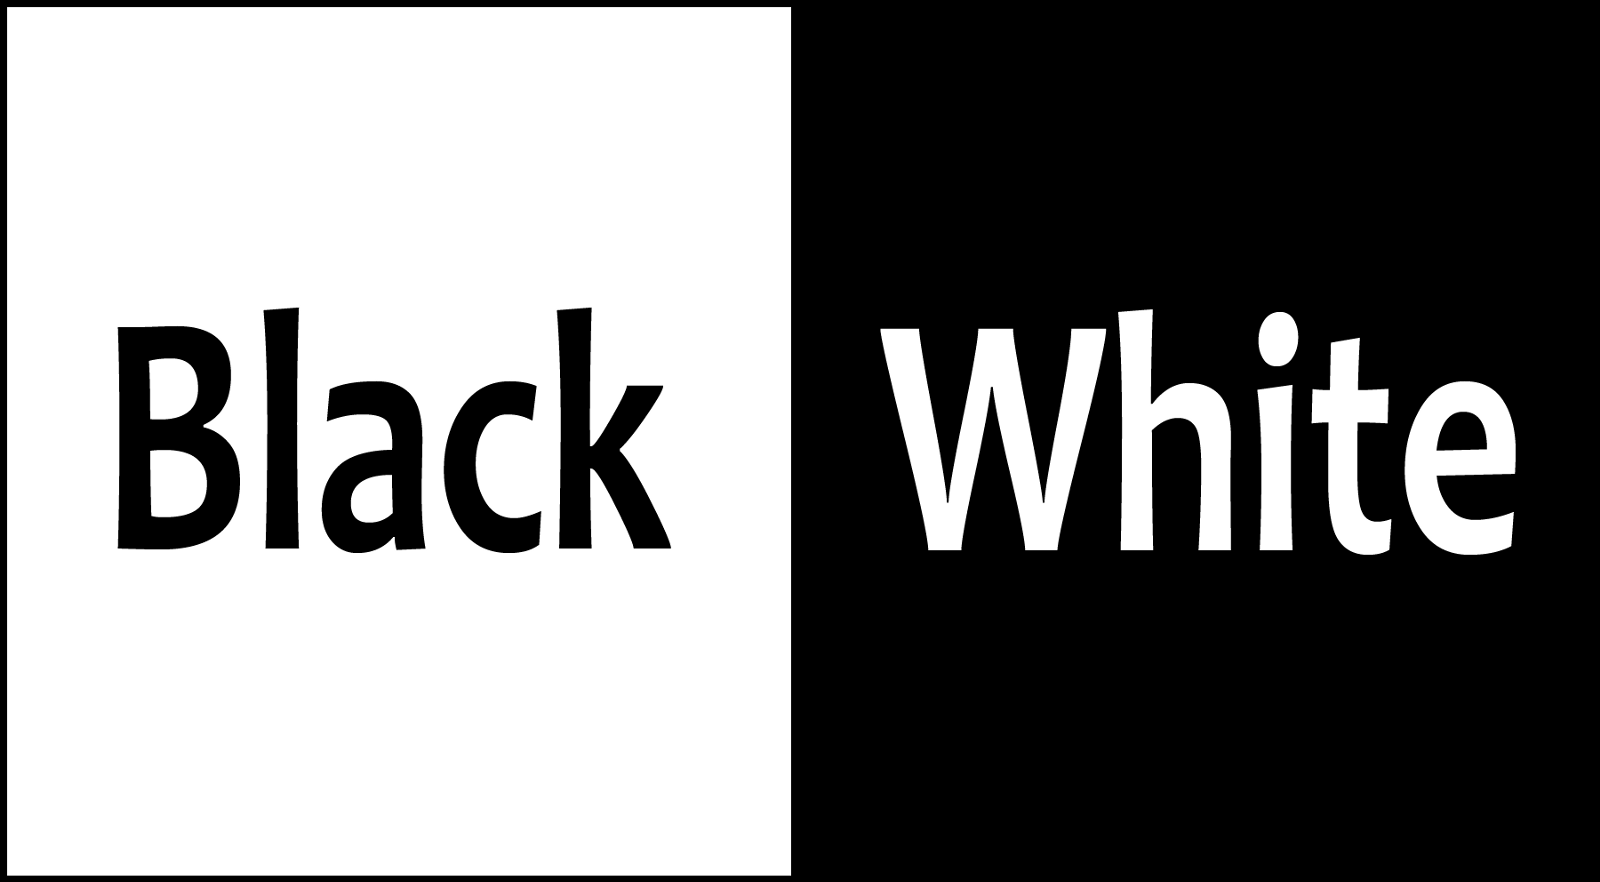 Black Word Logo - Word Connections: Black & White